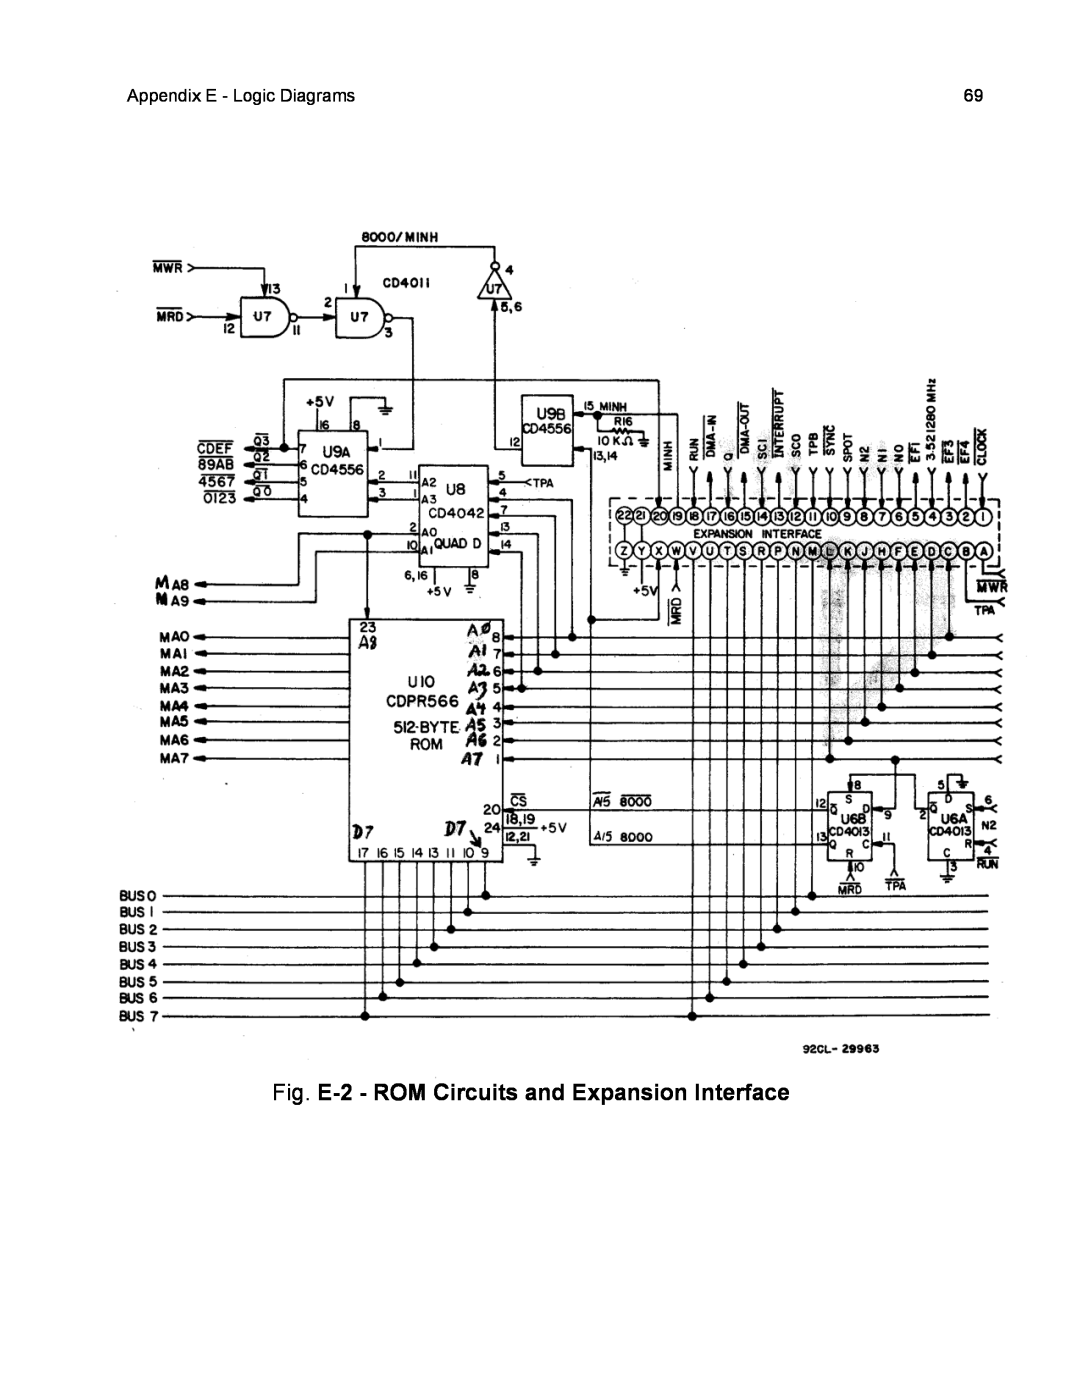 RCA CDP18S711 manual Fig. E-2- ROM Circuits and Expansion Interface, Appendix E - Logic Diagrams 